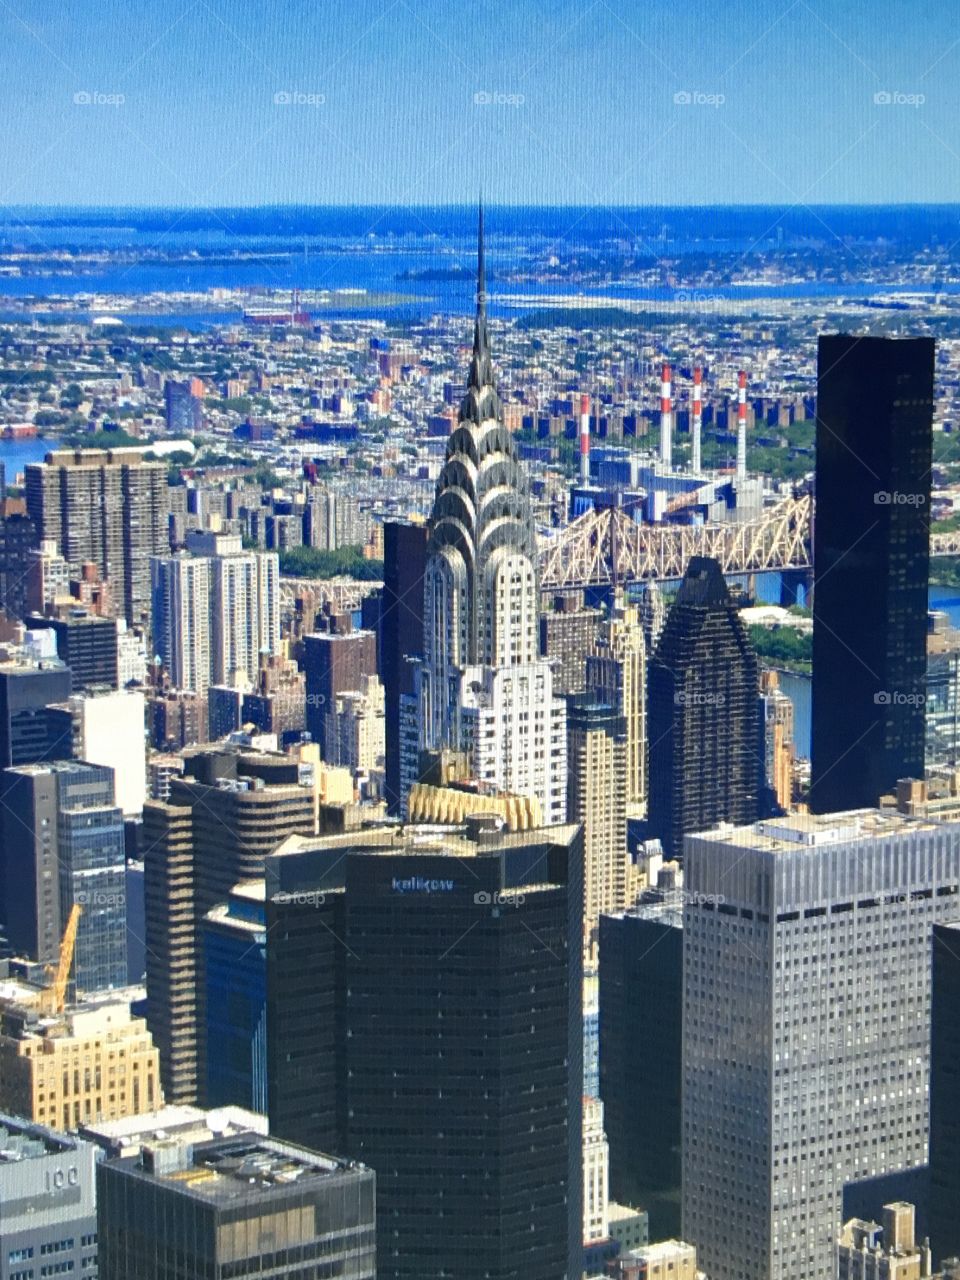 The Chrysler Building- taken from The Empire State Building.